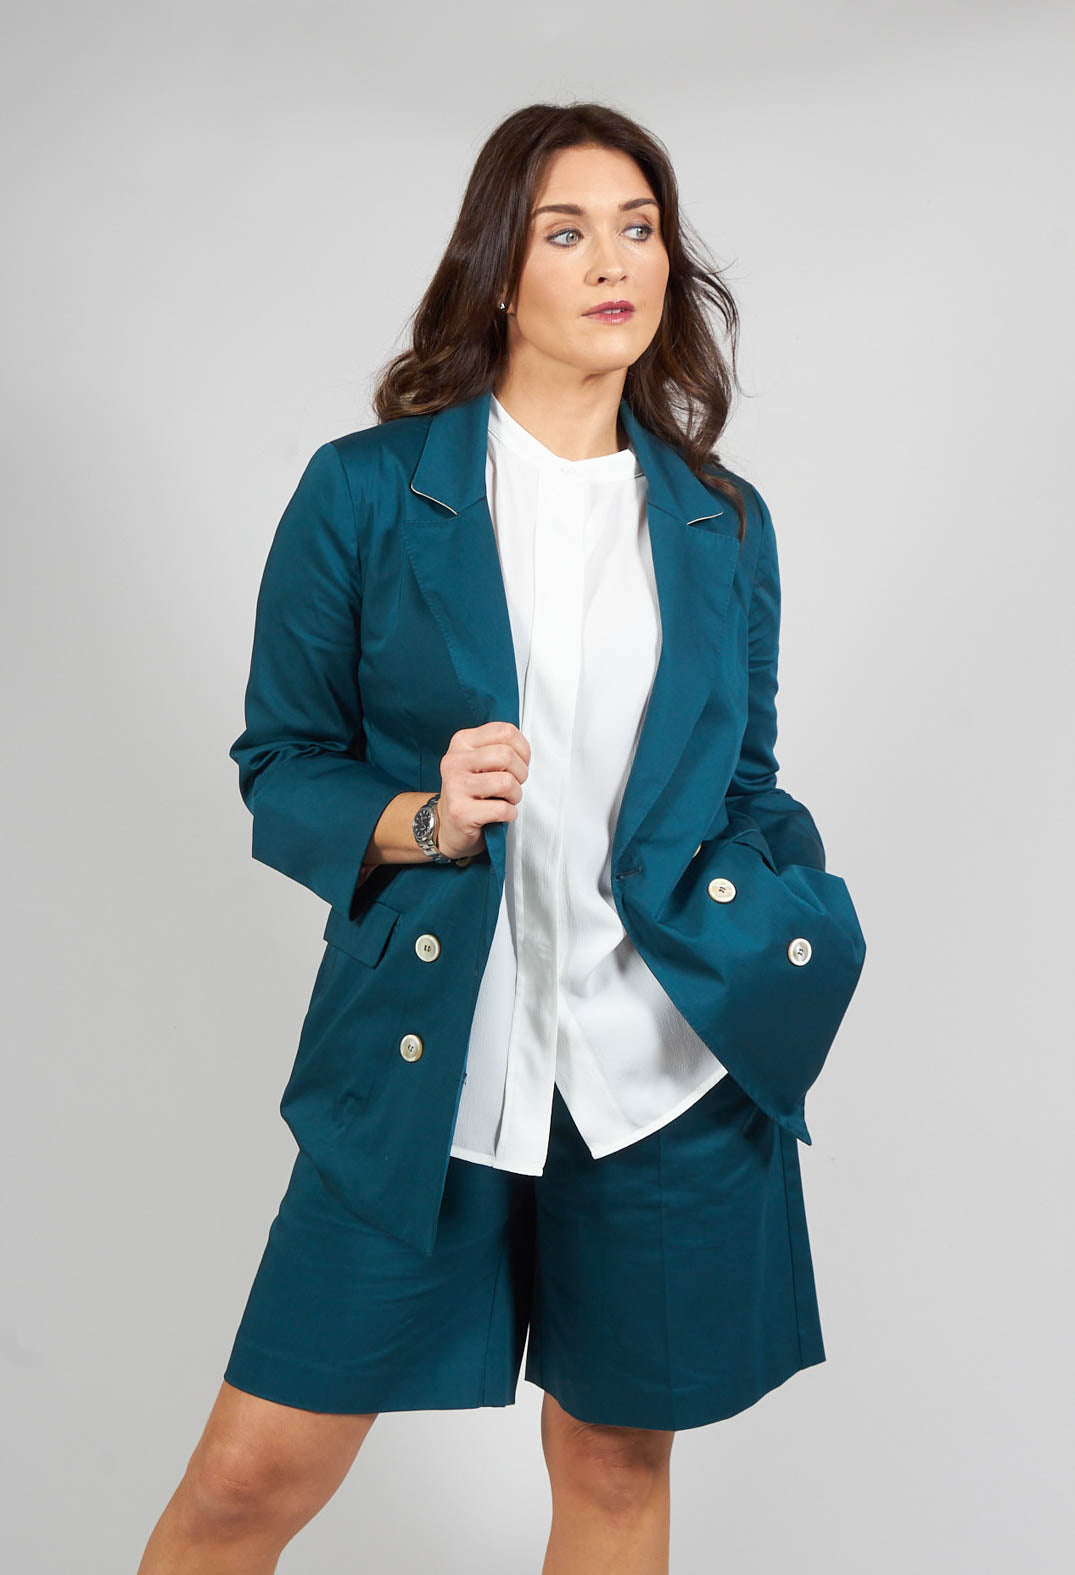 green tailored jacket with collar detail and button fastening